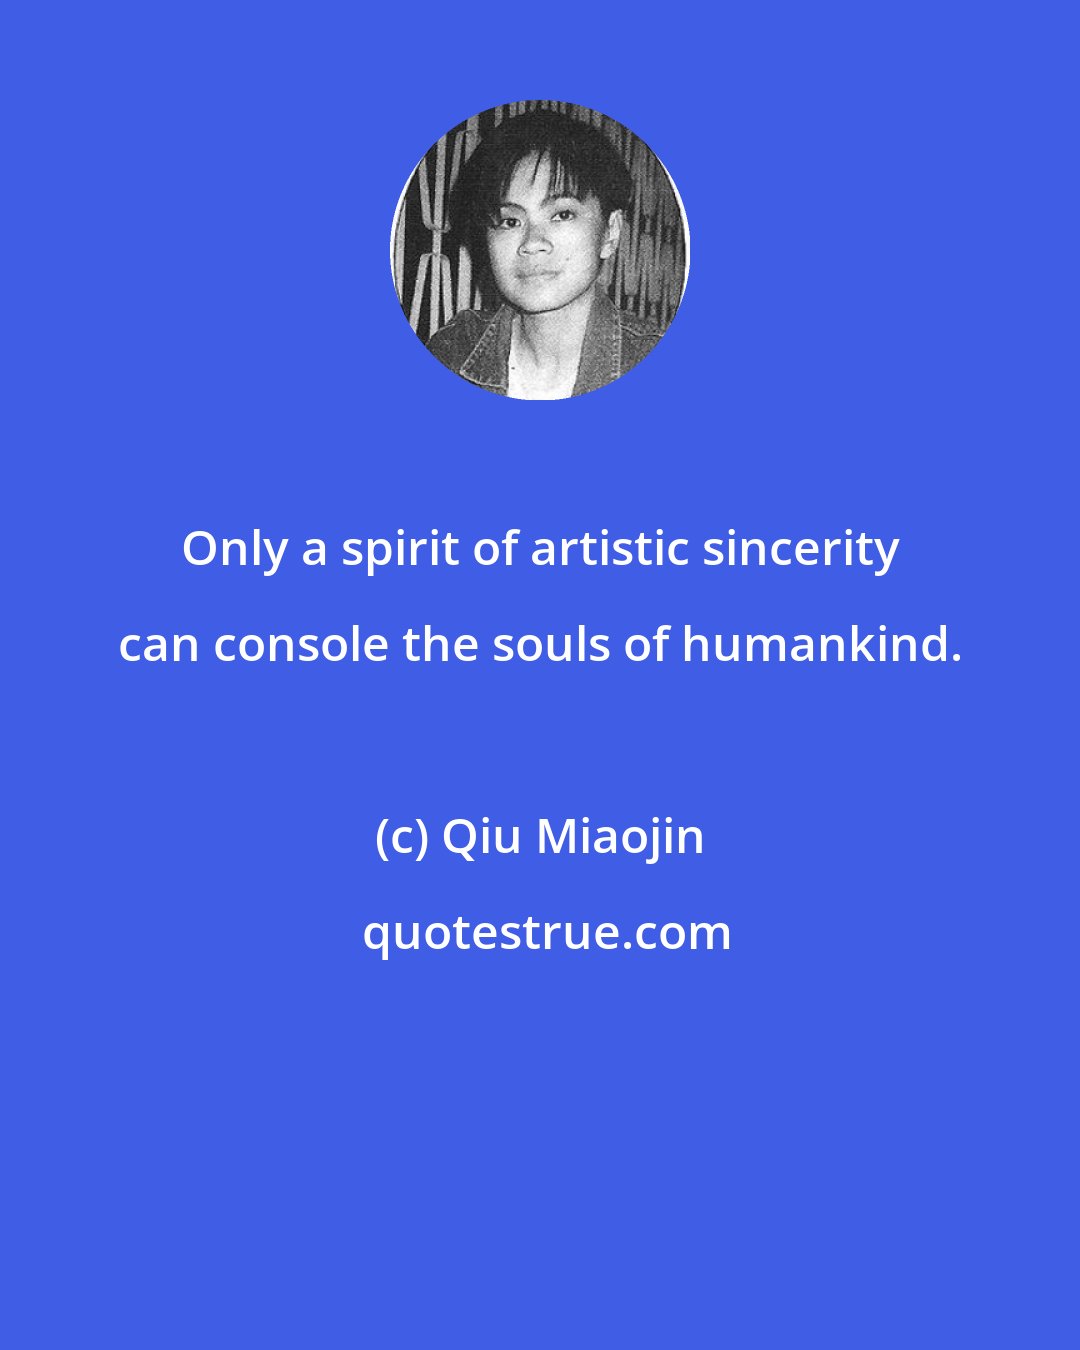 Qiu Miaojin: Only a spirit of artistic sincerity can console the souls of humankind.